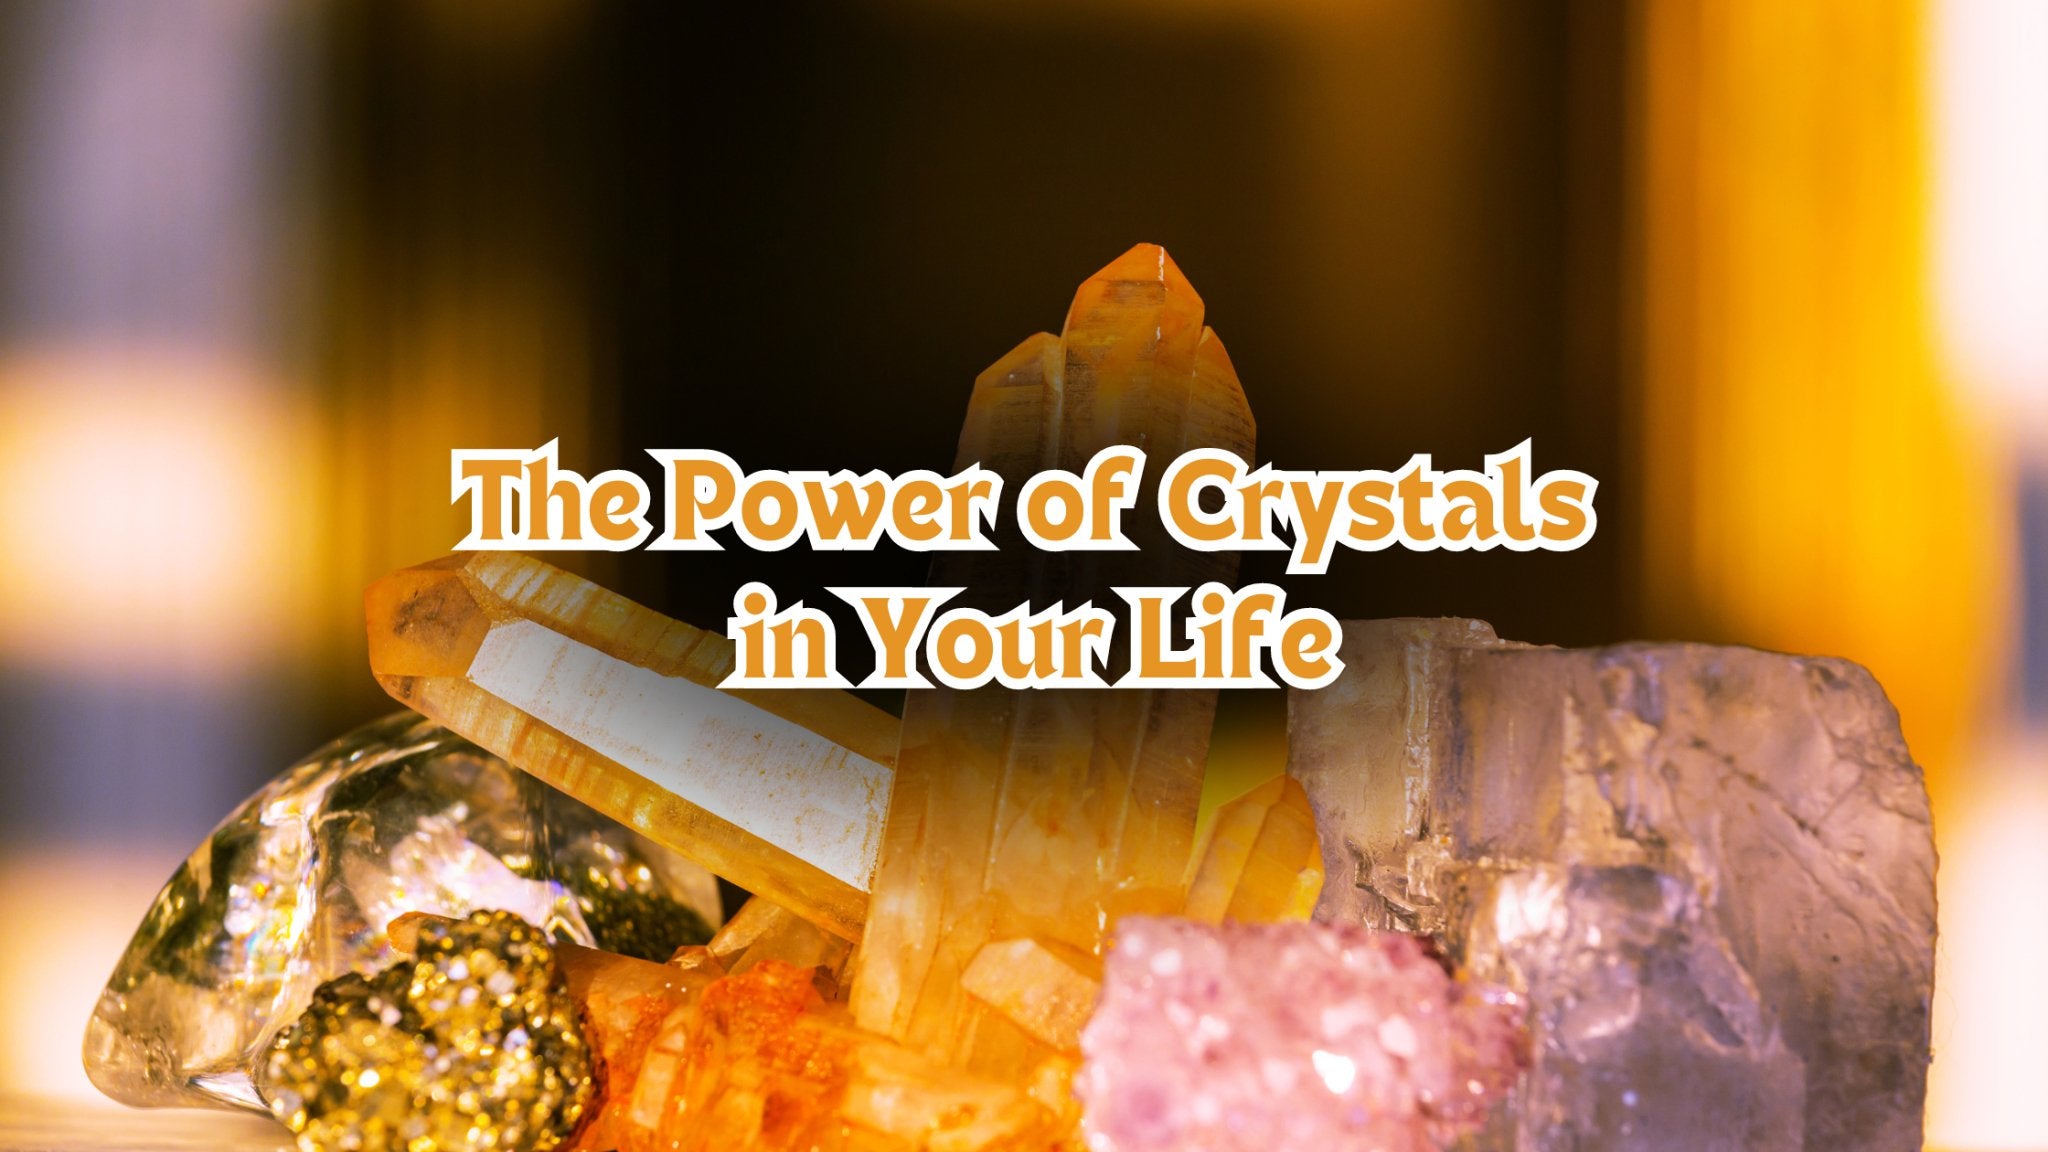 The Power of Crystals in Your Life - Buddha Power Store